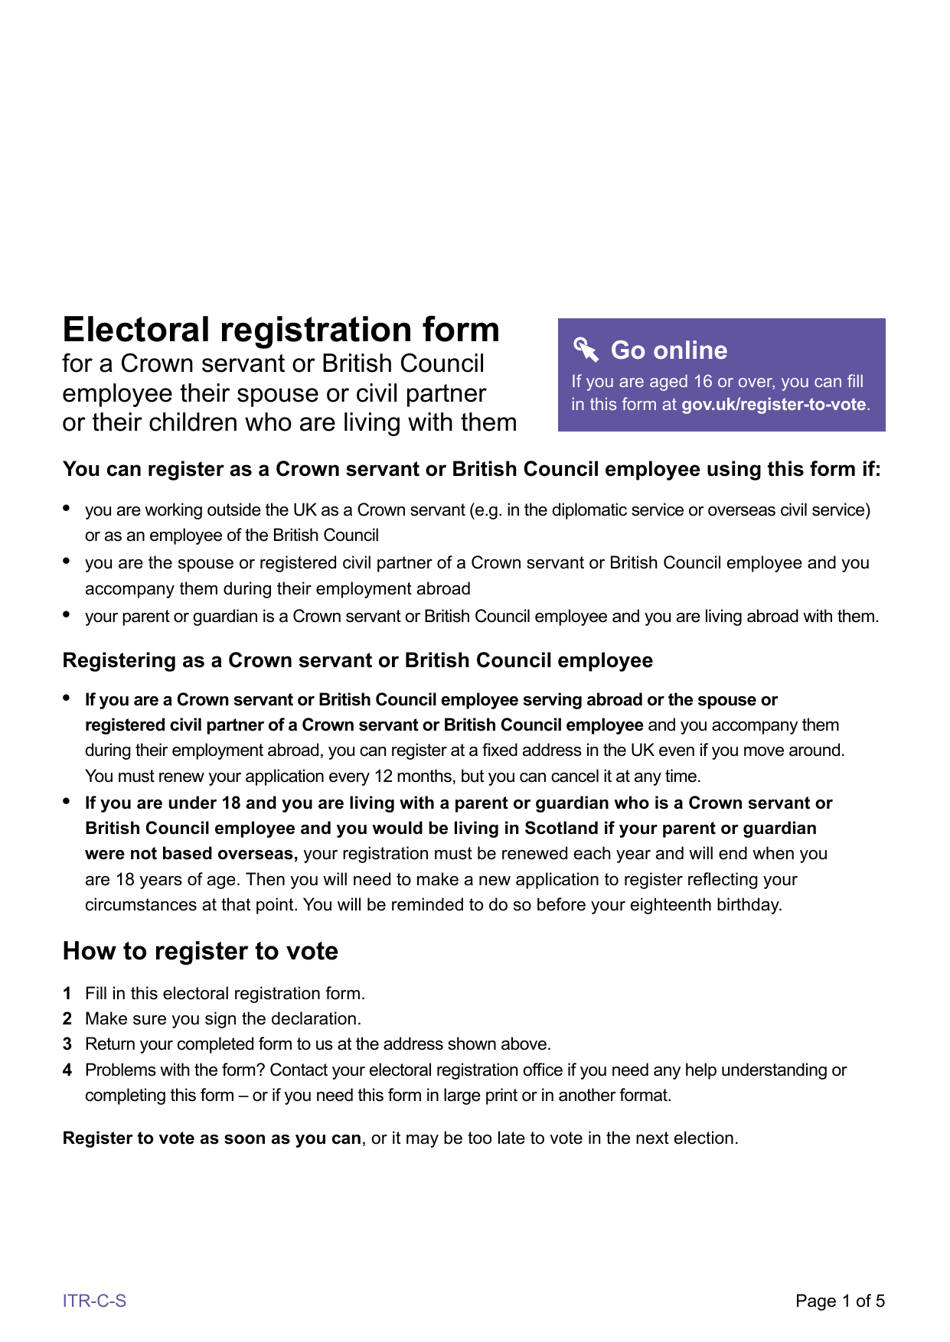 Electoral Registration Form for a Crown Servant or British Council Employee - United Kingdom, Page 1